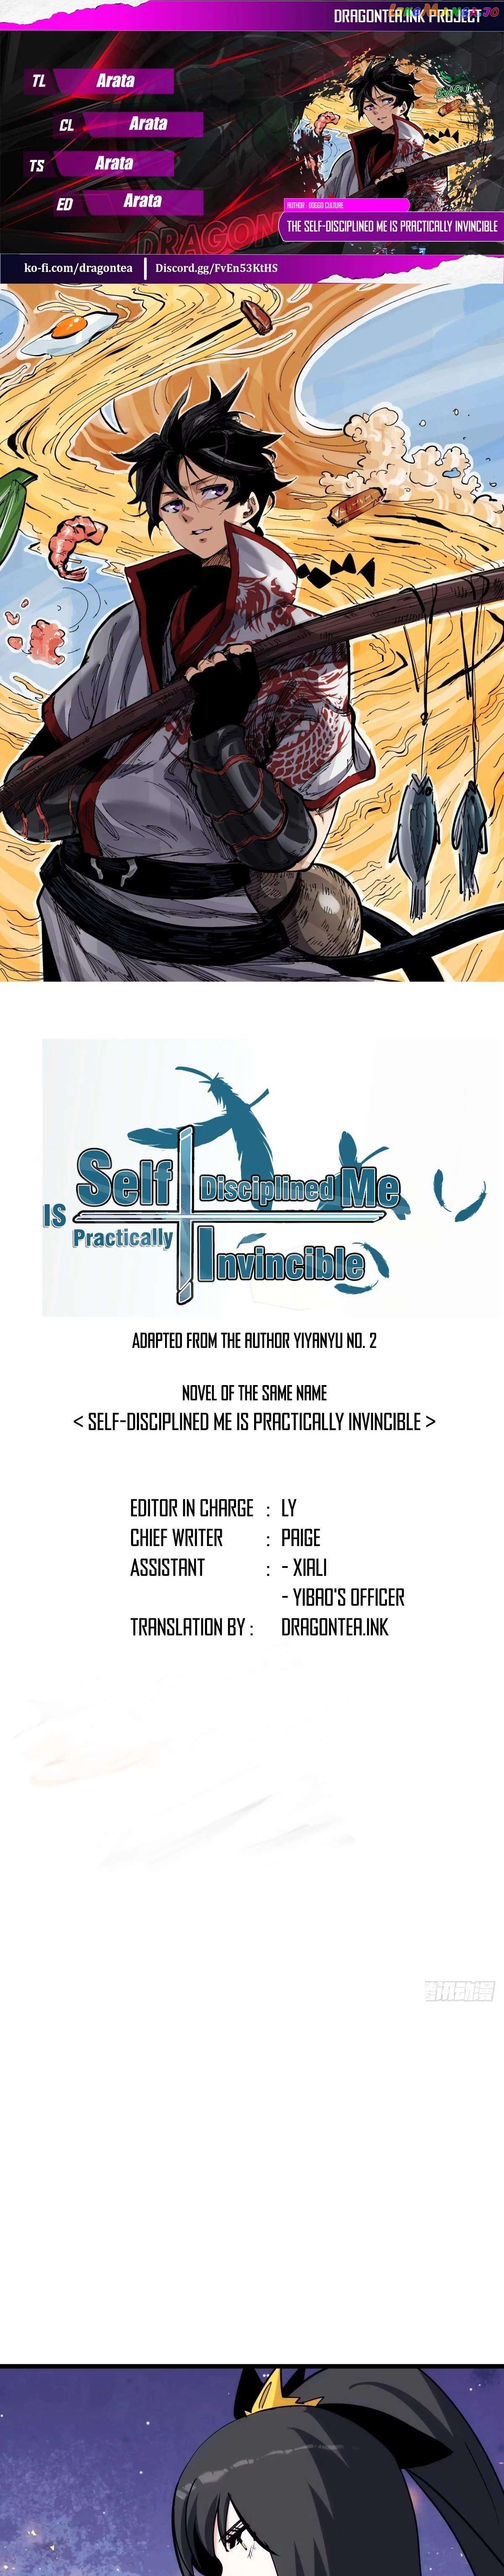 The Self-Disciplined Me Is Practically Invincible Chapter 35 - page 1